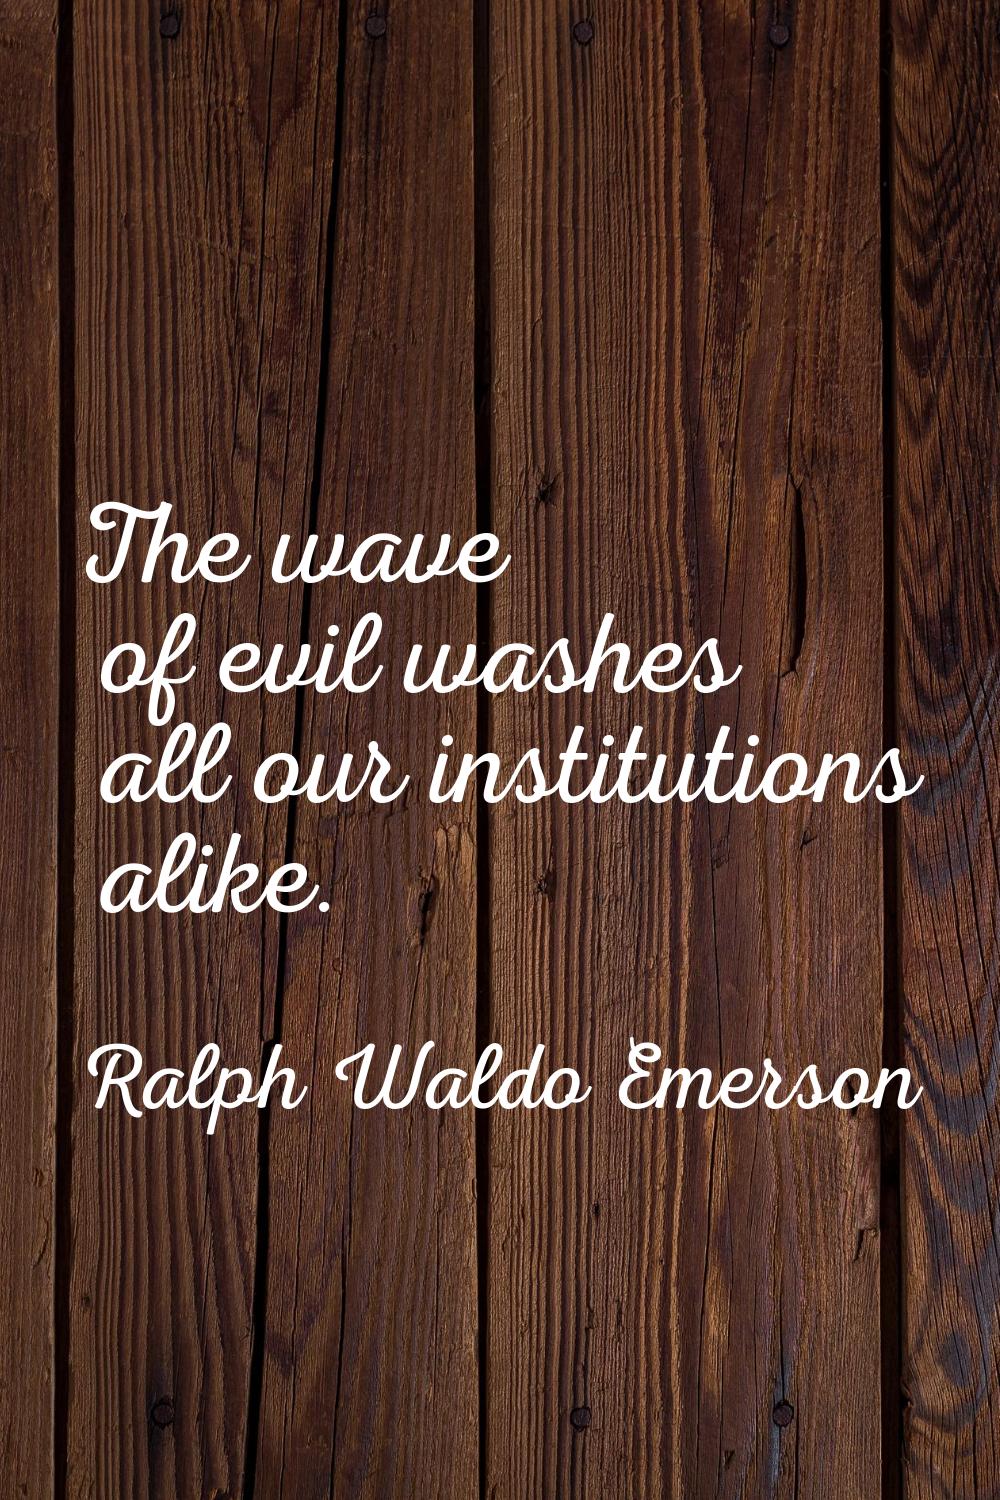 The wave of evil washes all our institutions alike.